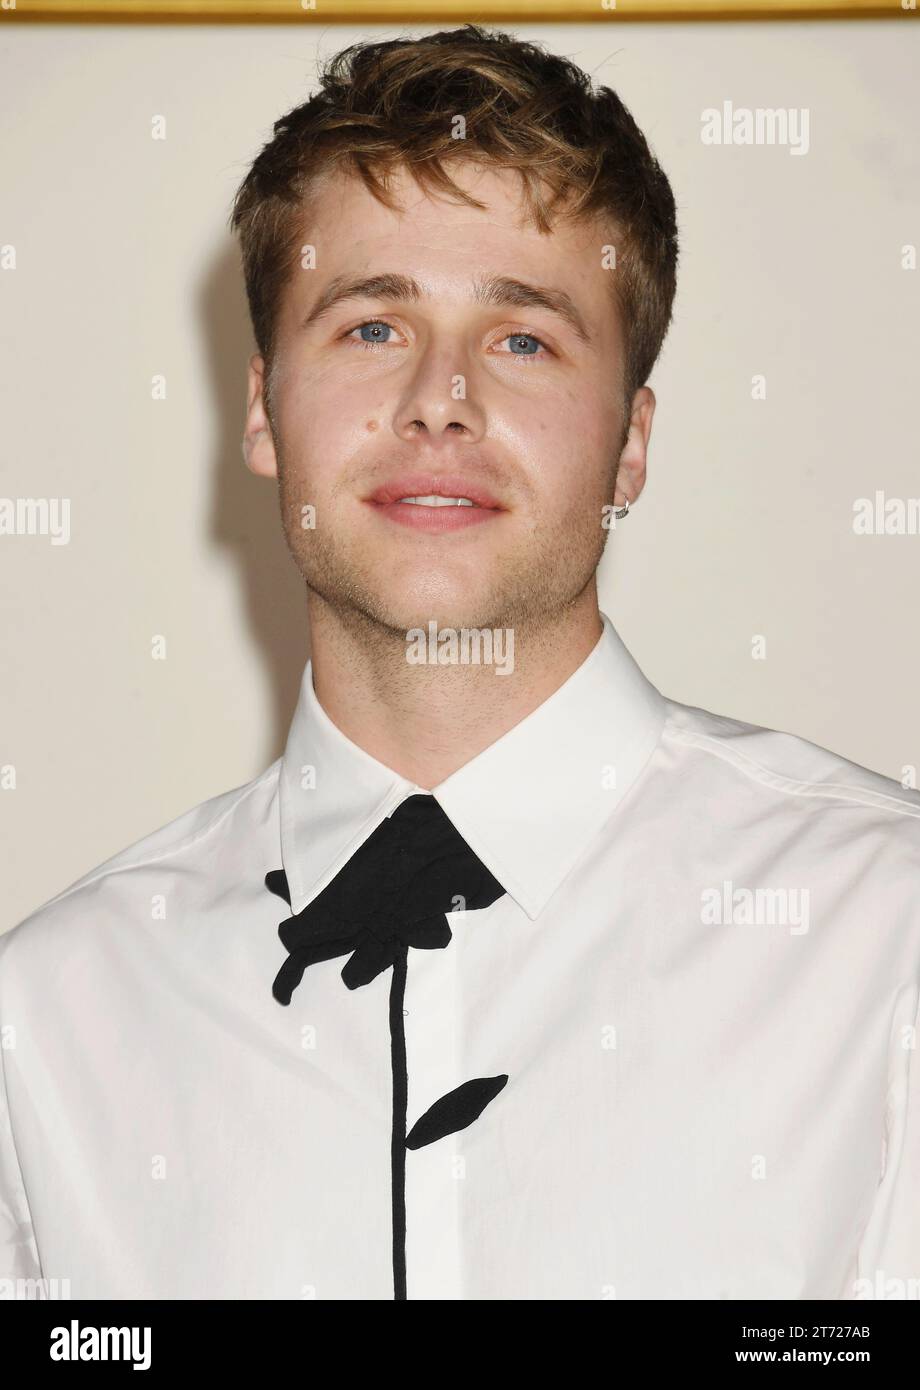 Los Angeles, California, USA. 12th Nov, 2023. Ed McVey attends the premiere of Netflix's 'The Crown' Season 6 Part 1 at Regency Village Theatre on November 12, 2023 in Los Angeles, California. Credit: Jeffrey Mayer/Jtm Photos/Media Punch/Alamy Live News Stock Photo